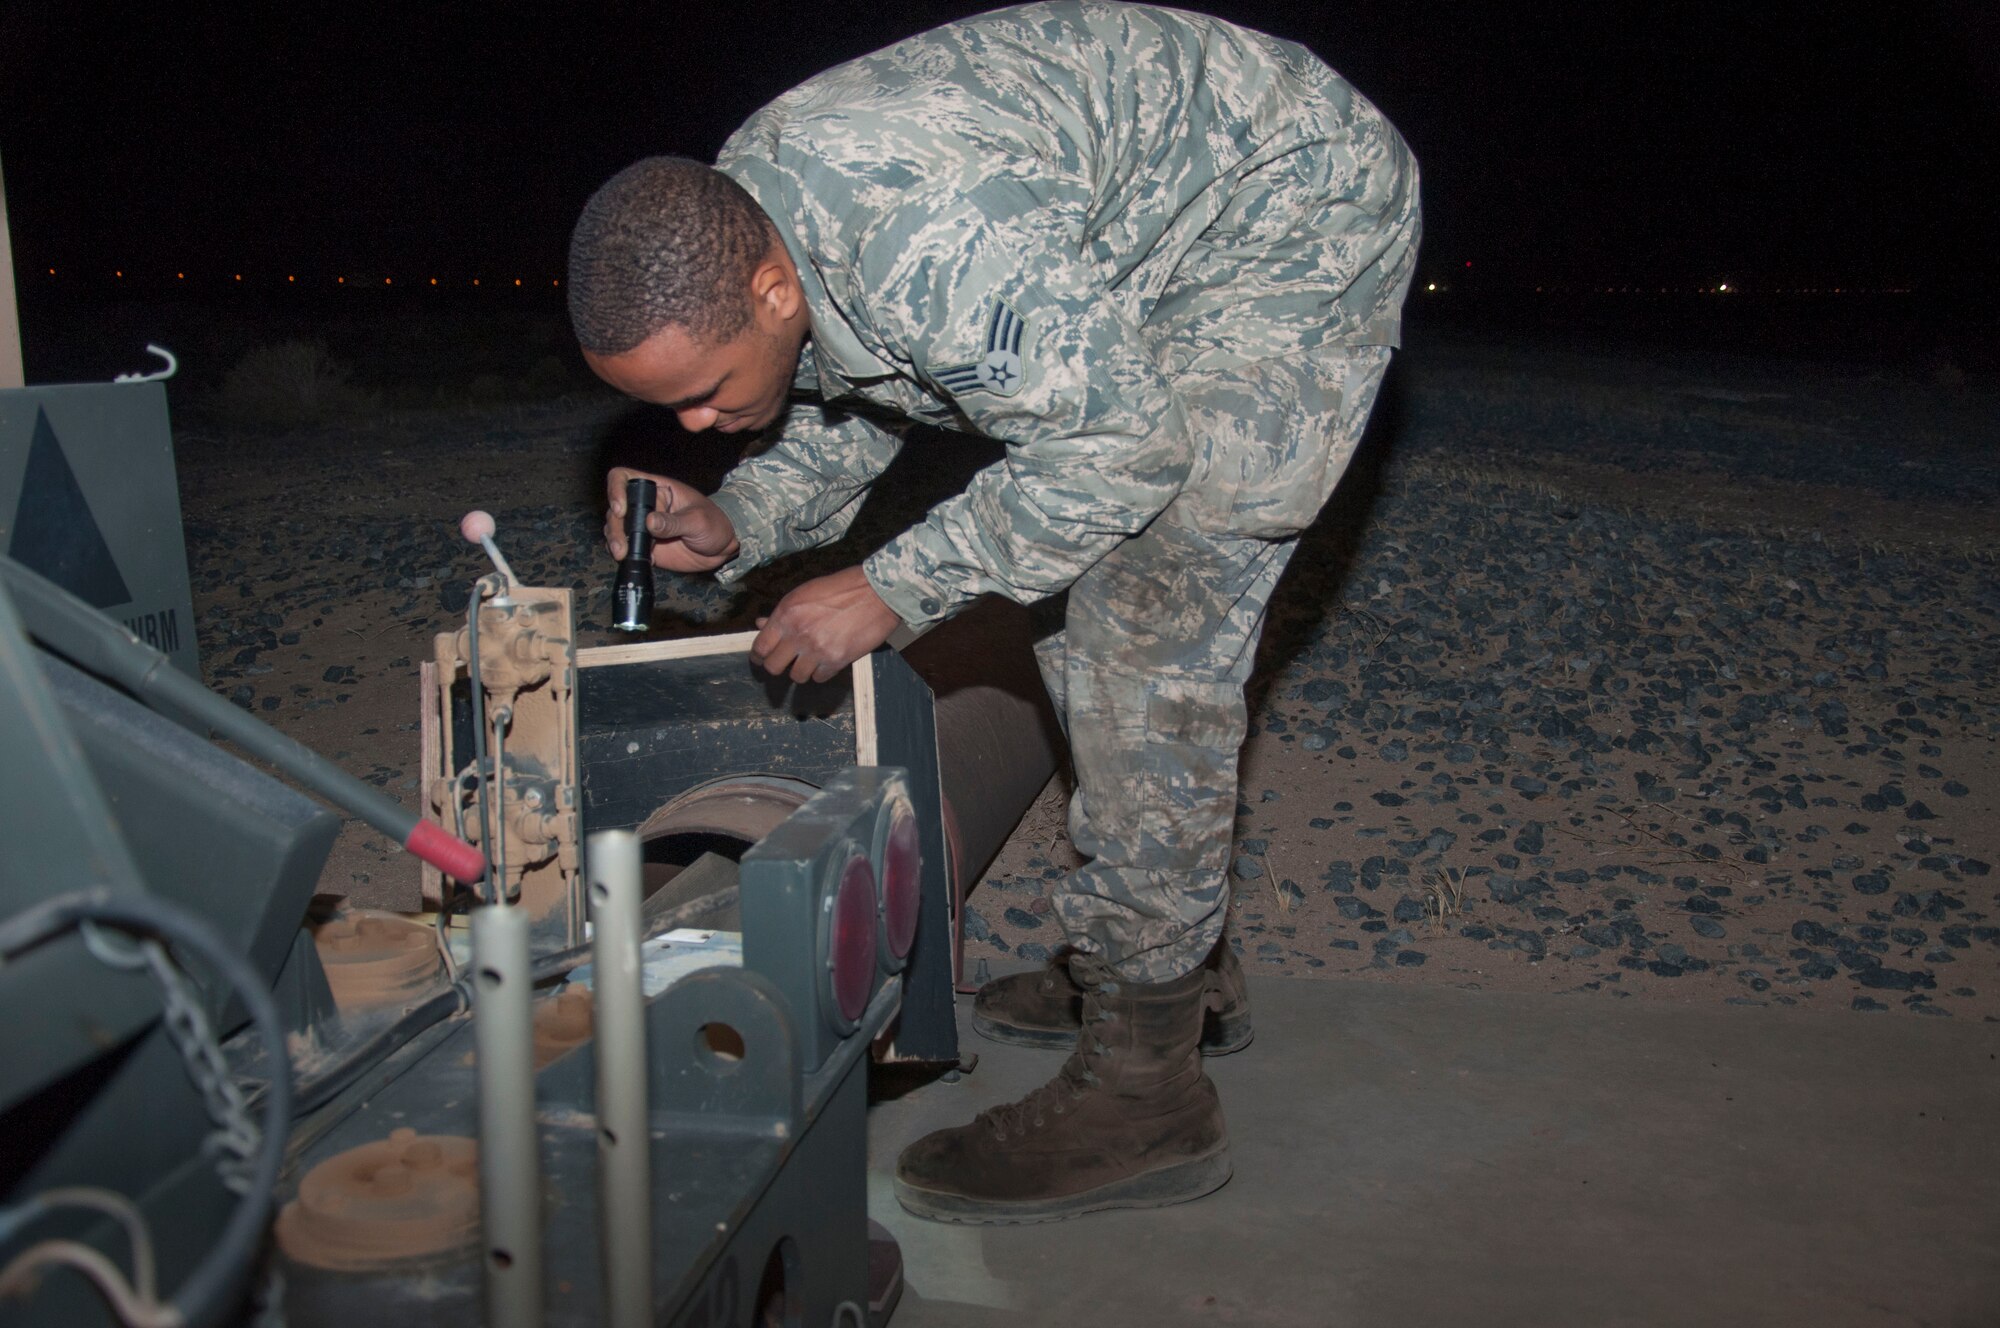 Senior Airman Quentin Palmore, a power production specialist assigned to the 386th Expeditionary Civil Engineer Squadron, conducts and inspection on a mobile aircraft arresting system at an undisclosed location in southwest Asia, June 24, 2017. A visual inspection is performed on these units daily. (U.S. Air Force Photo by Master Sgt. Eric M. Sharman)